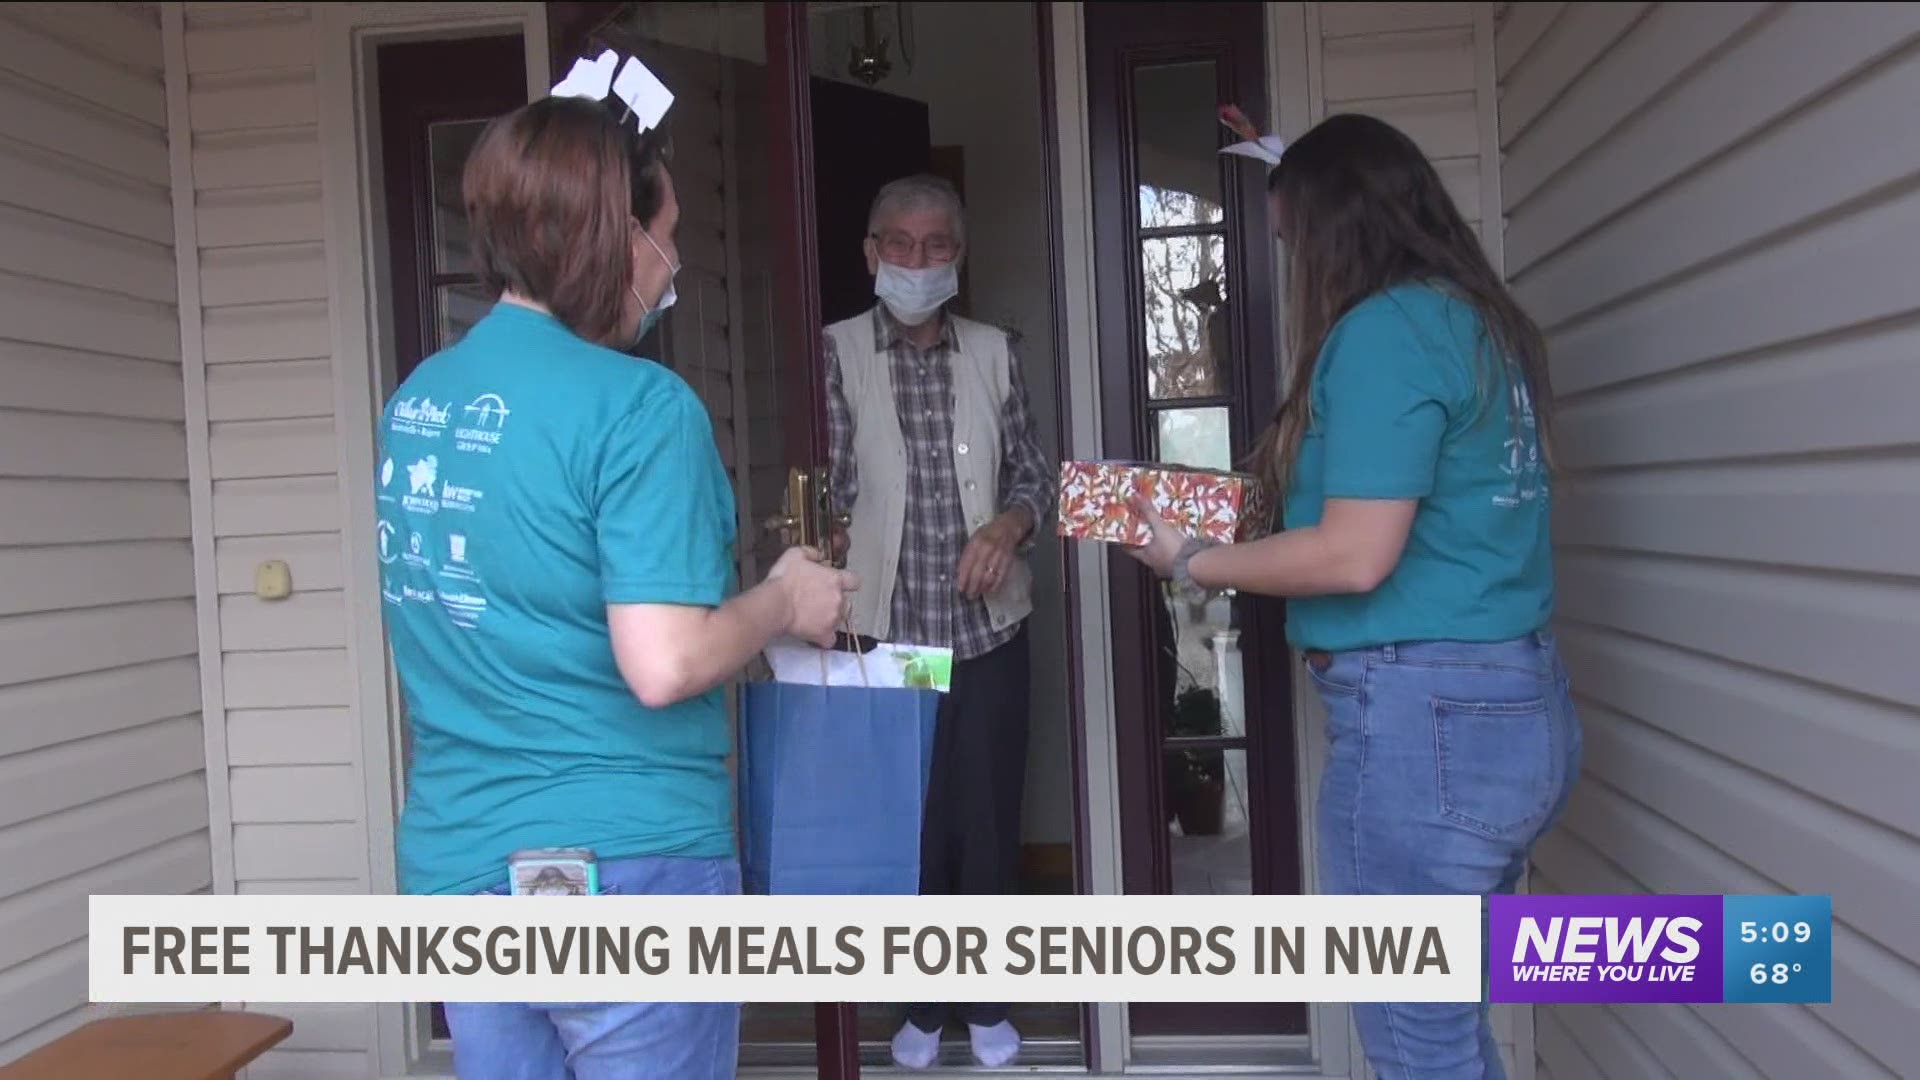 Volunteers handed out free Thanksgiving meals to senior citizens across Northwest Arkansas.